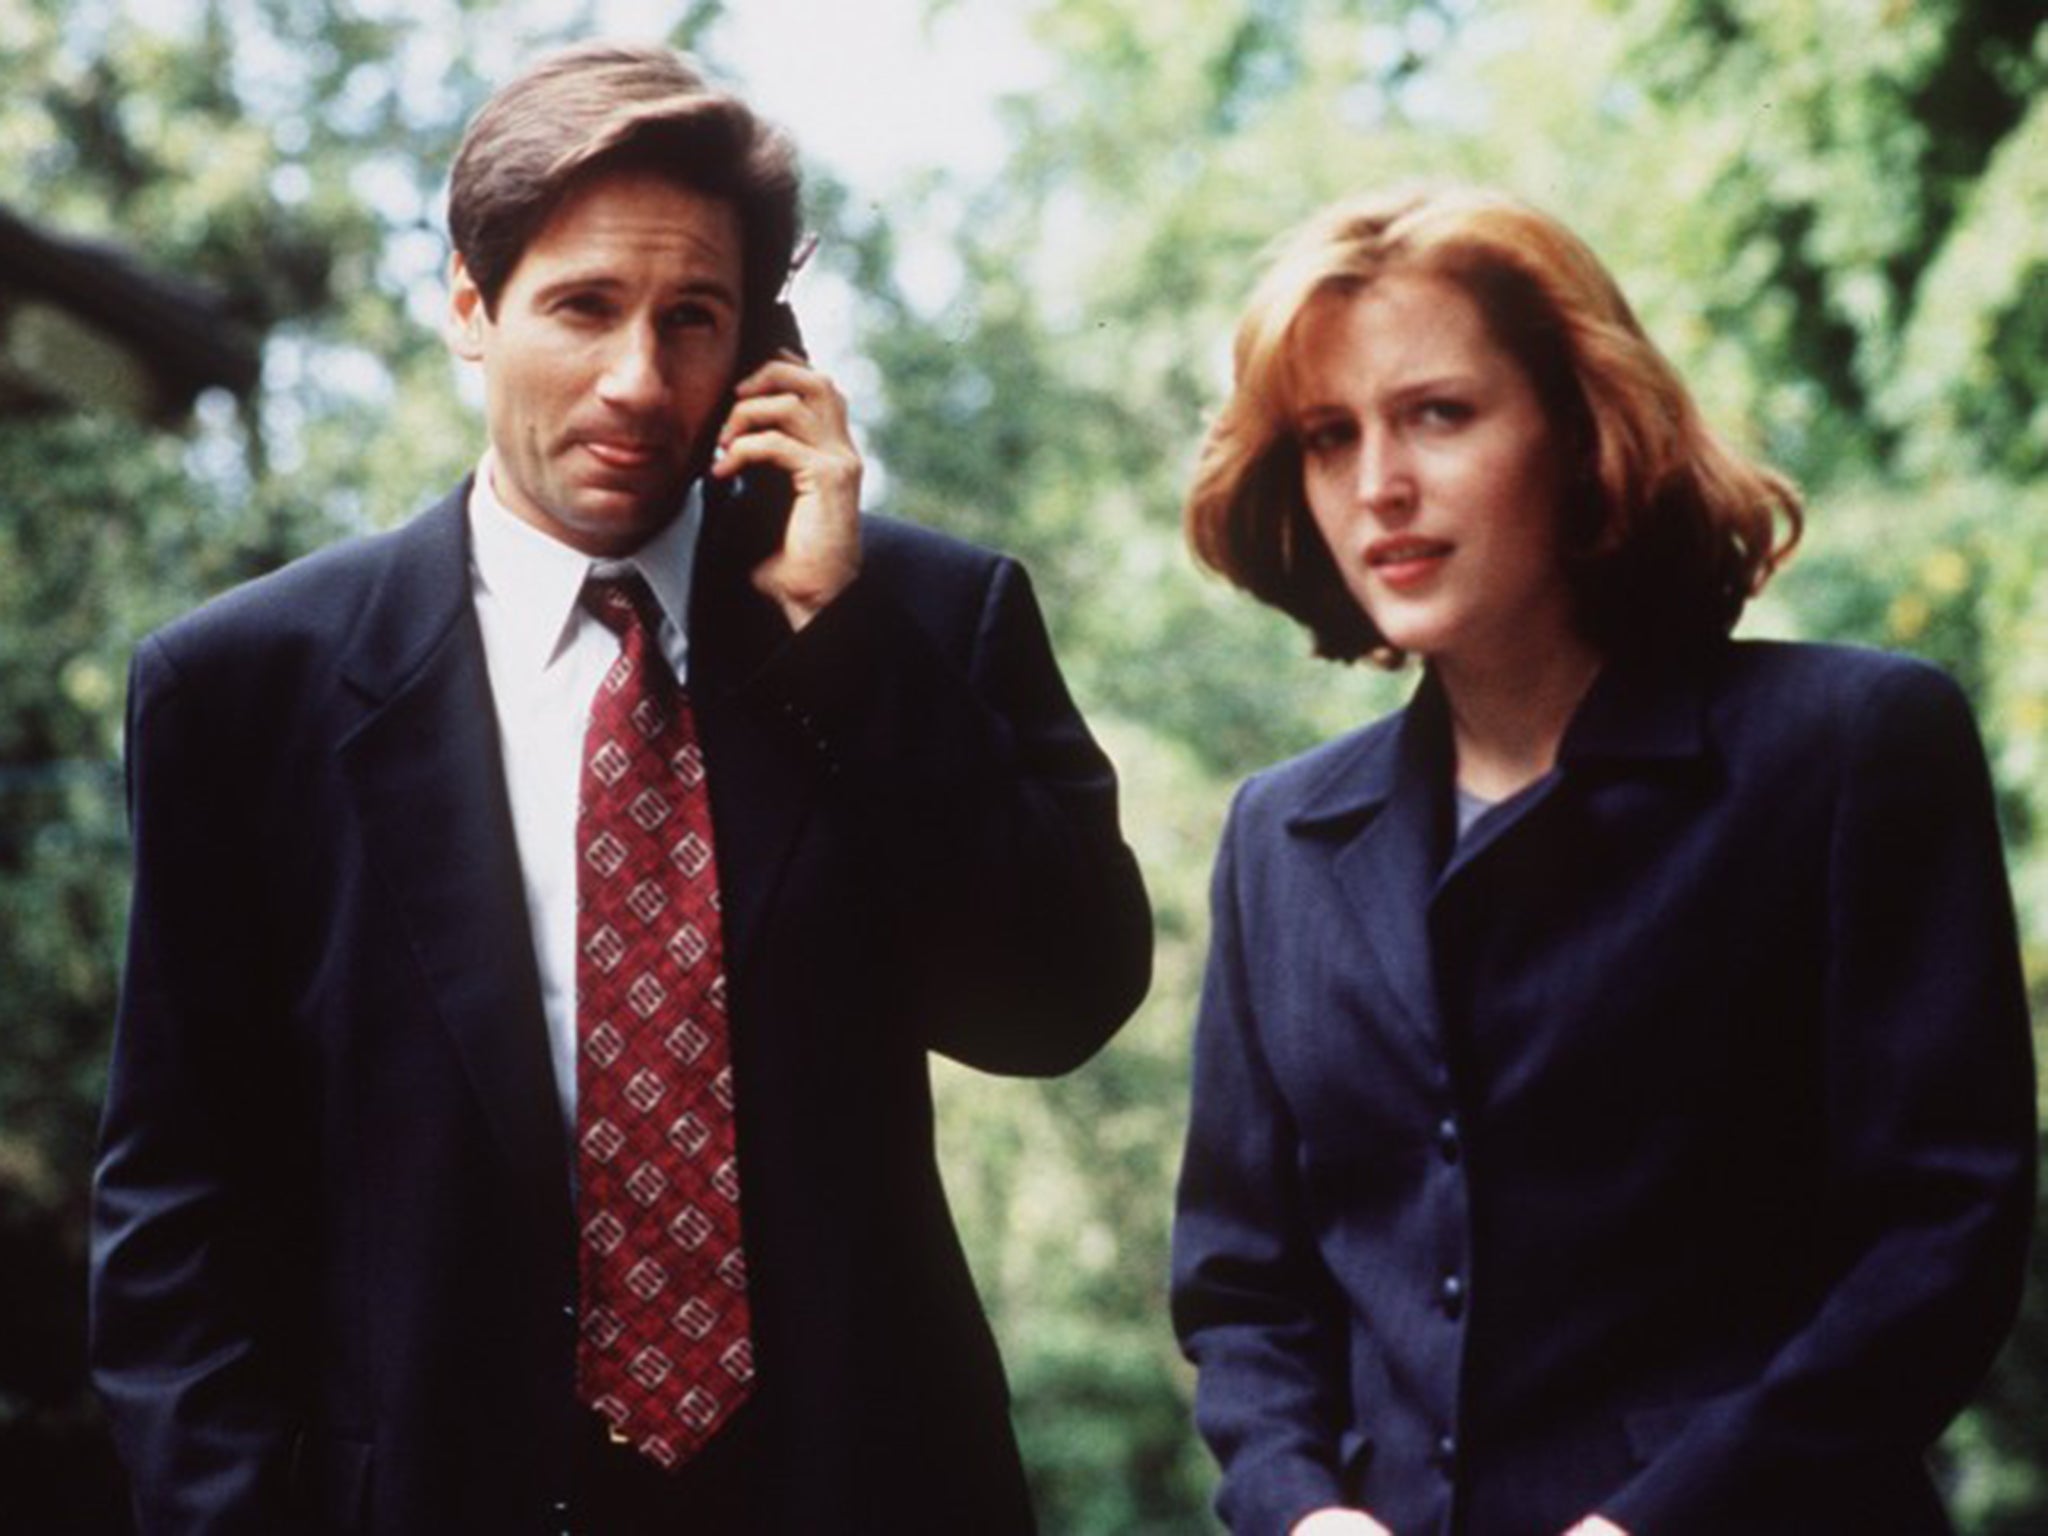 David Duchovny and Gillian Anderson as Mulder and Scully in The X Files